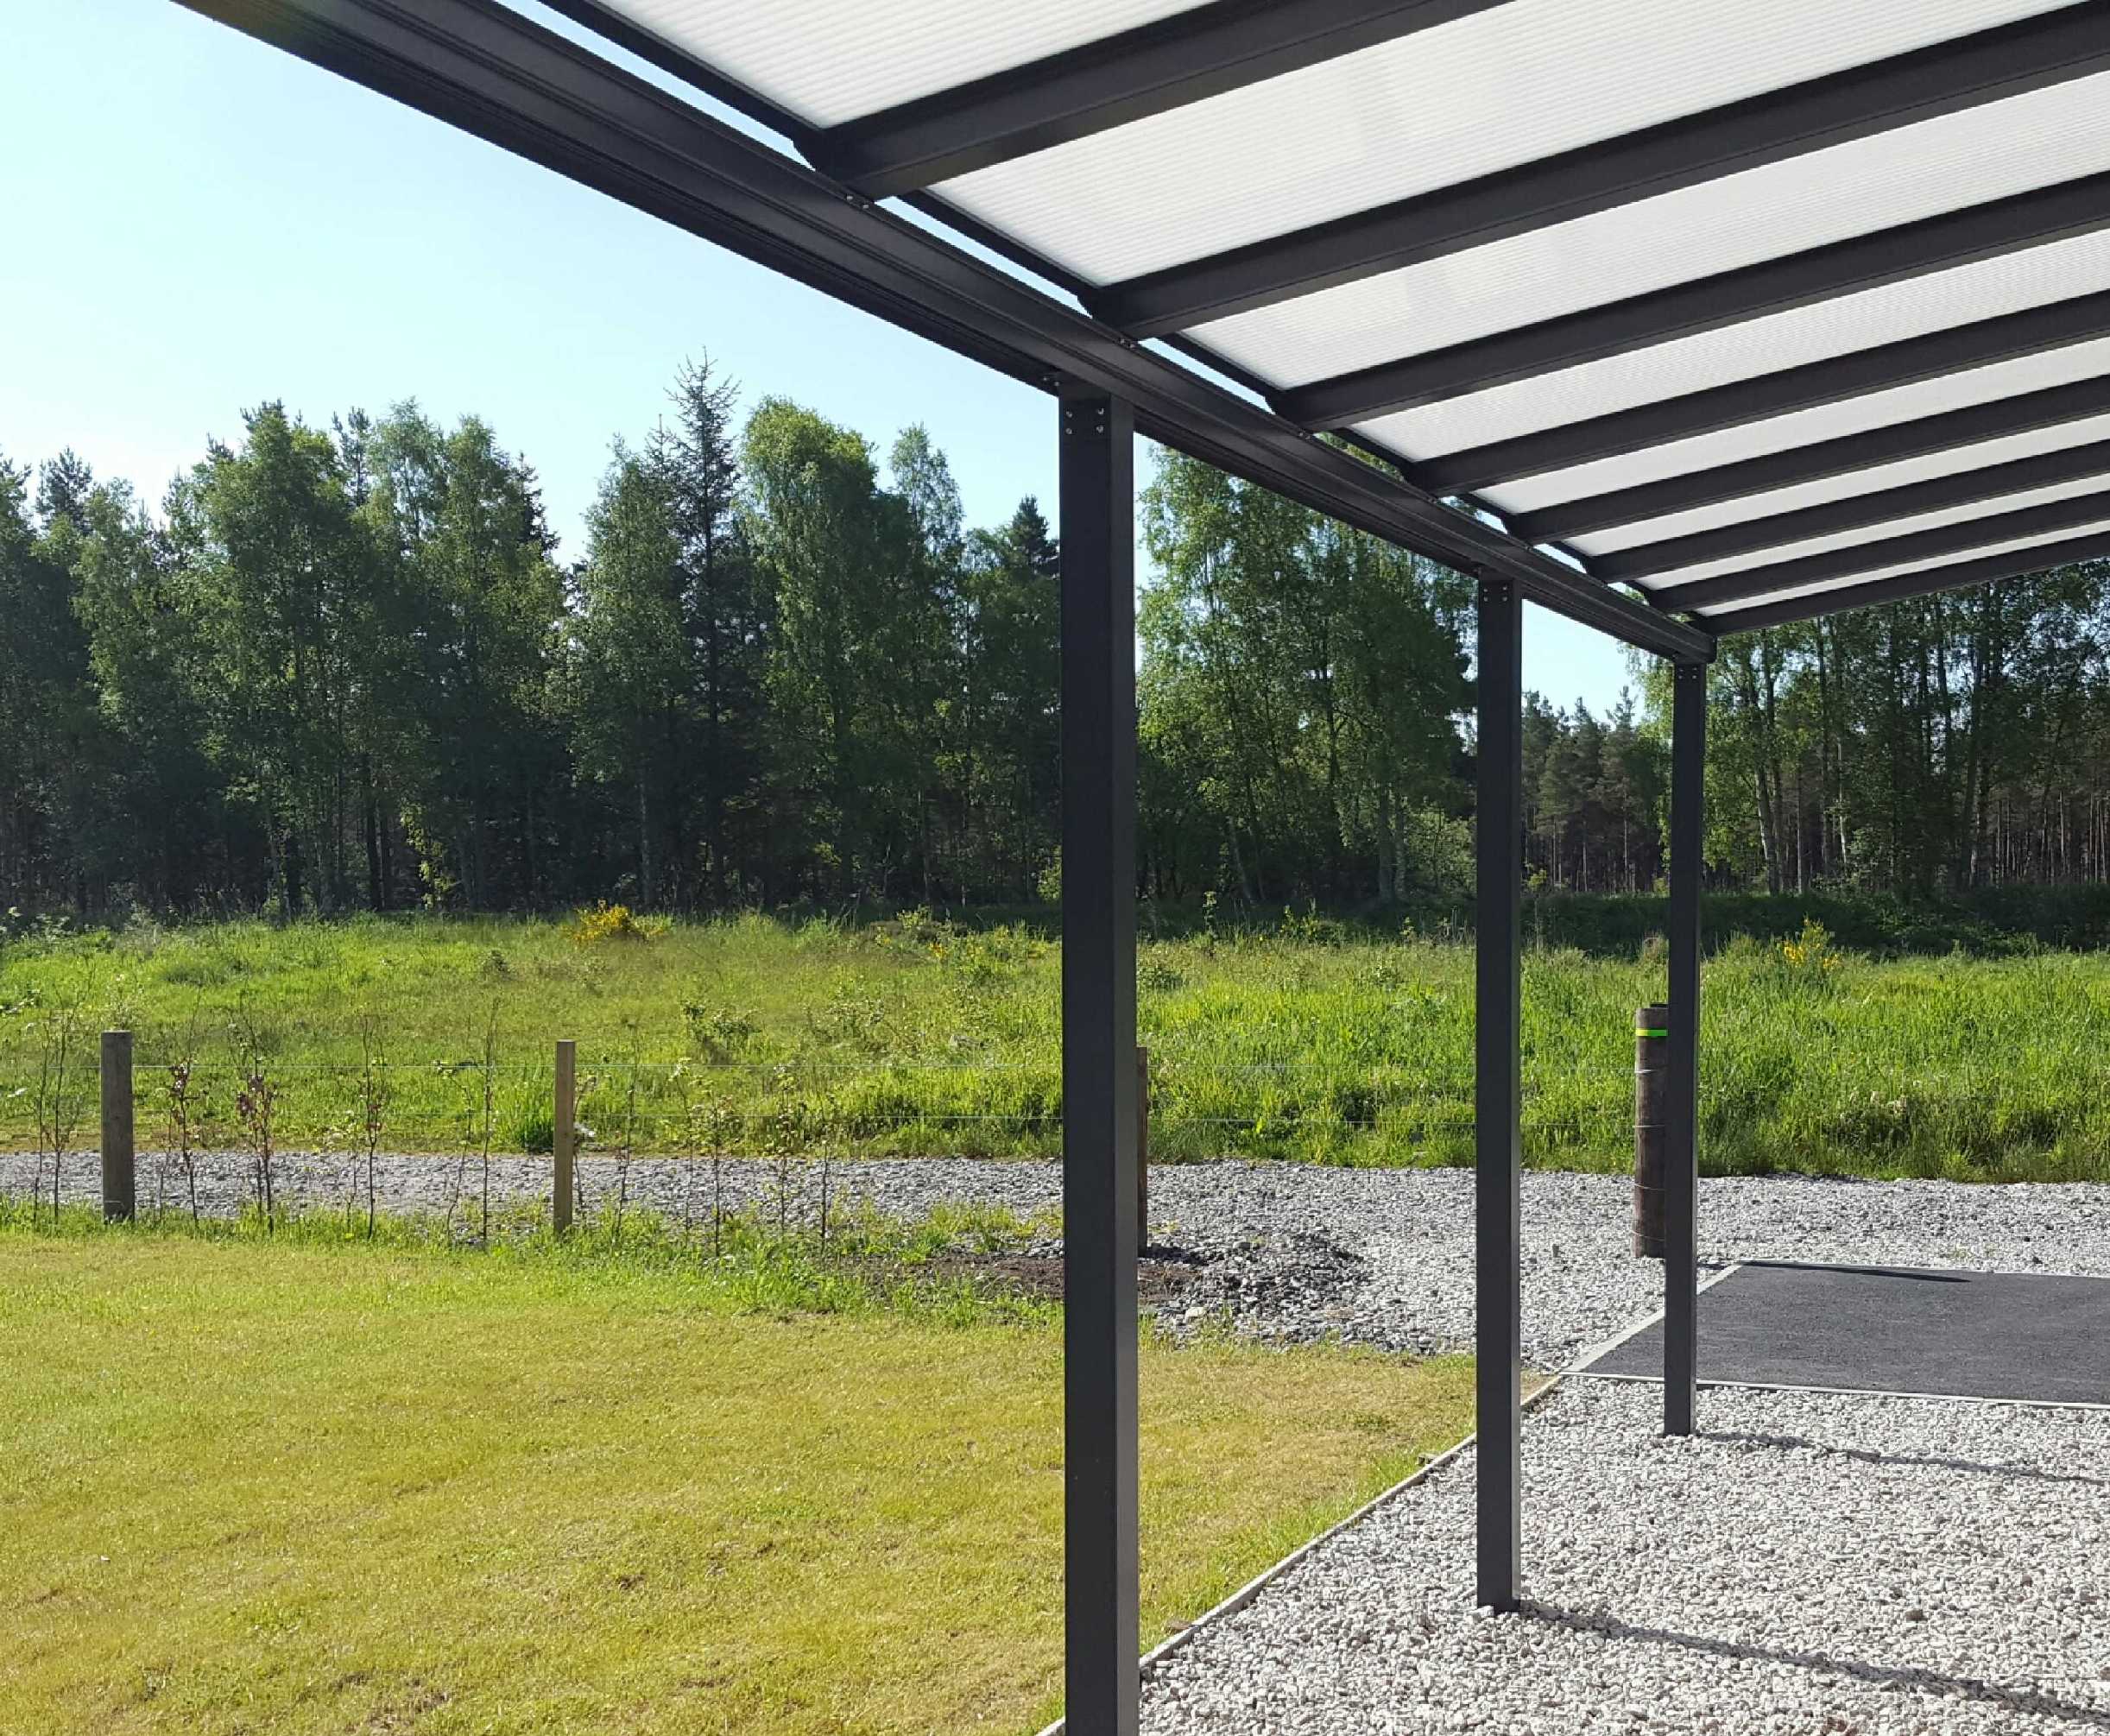 Omega Smart Lean-To Canopy, Anthracite Grey, 6mm Glass Clear Plate Polycarbonate Glazing - 2.1m (W) x 1.5m (P), (2) Supporting Posts